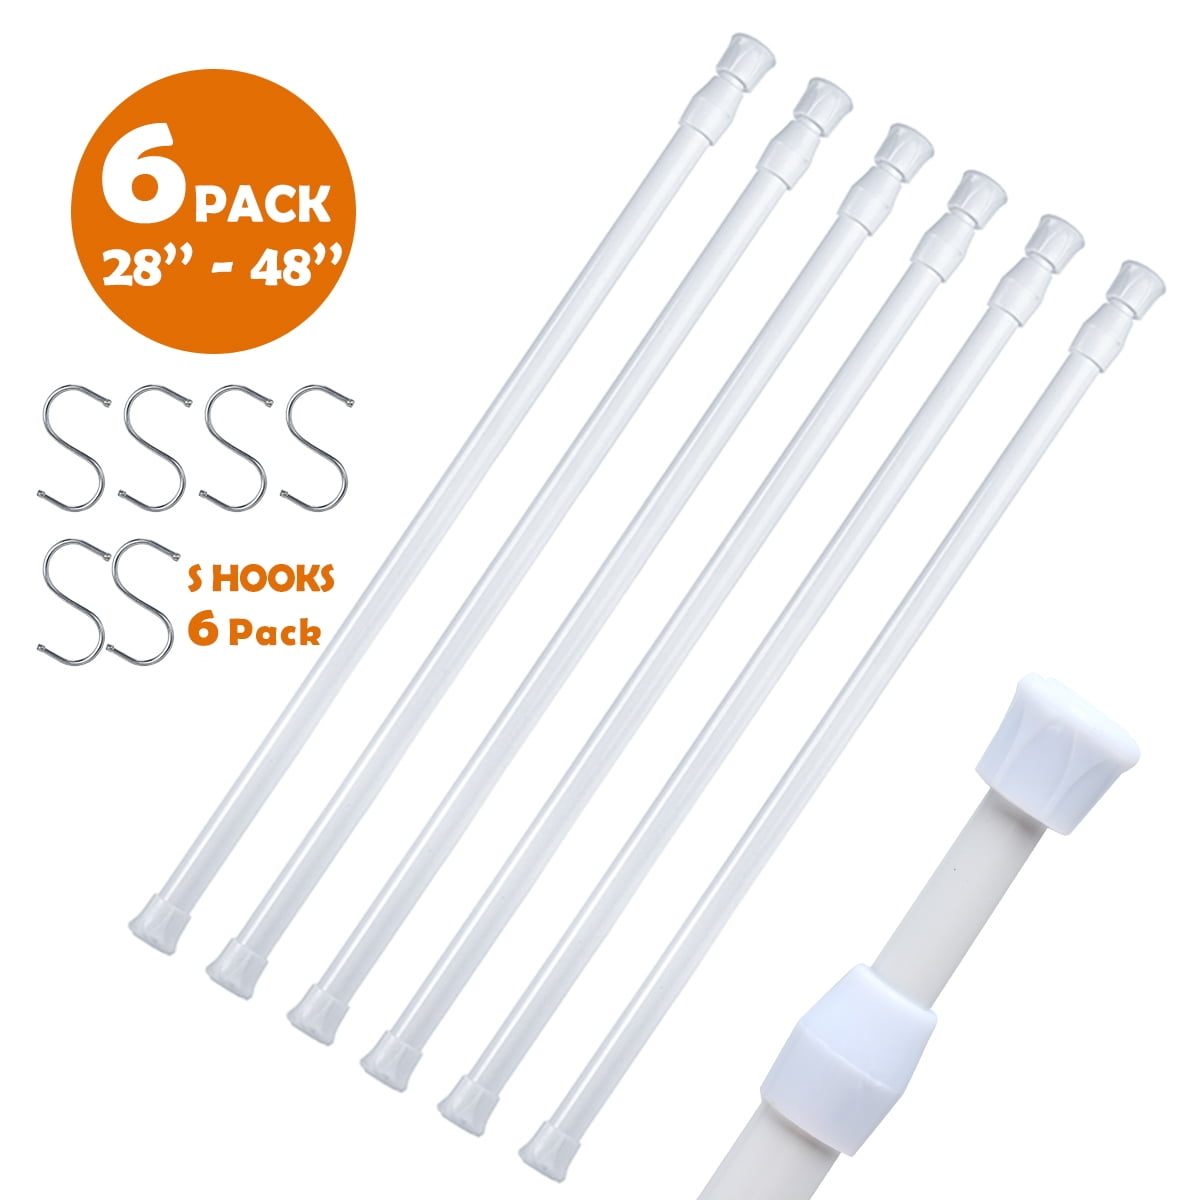 MinCHI257 Tension Rods 28 to 48 Inches 6 Pack，Tension Curtain Rod,Spring Curtain Rods Window Rods Kitchen Window Bathroom White Thin Tension Rod Black